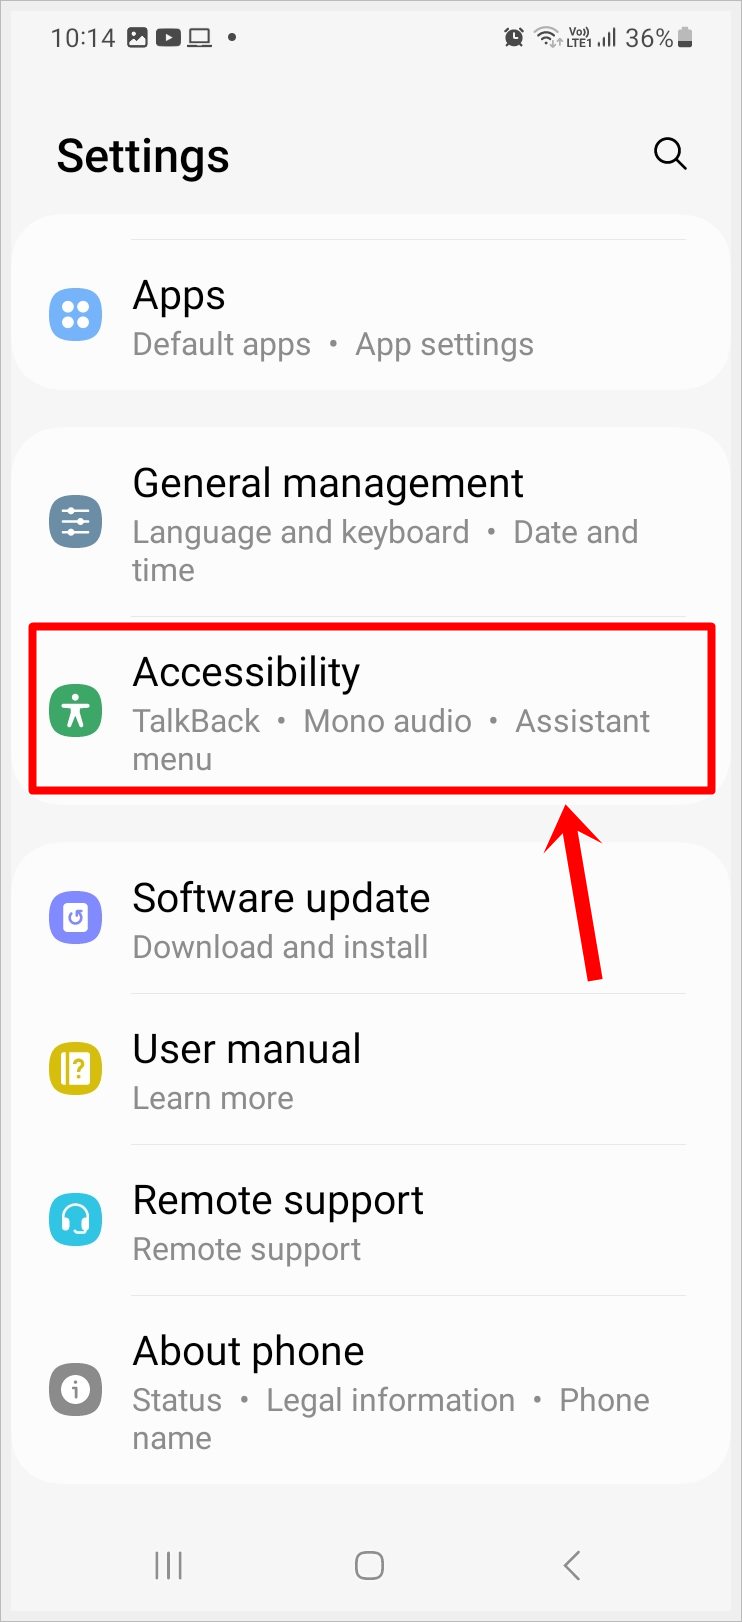 This image shows a screenshot of the 'Settings' page of a Samsung Galaxy phone. The 'Accessibility' option is highlighted.